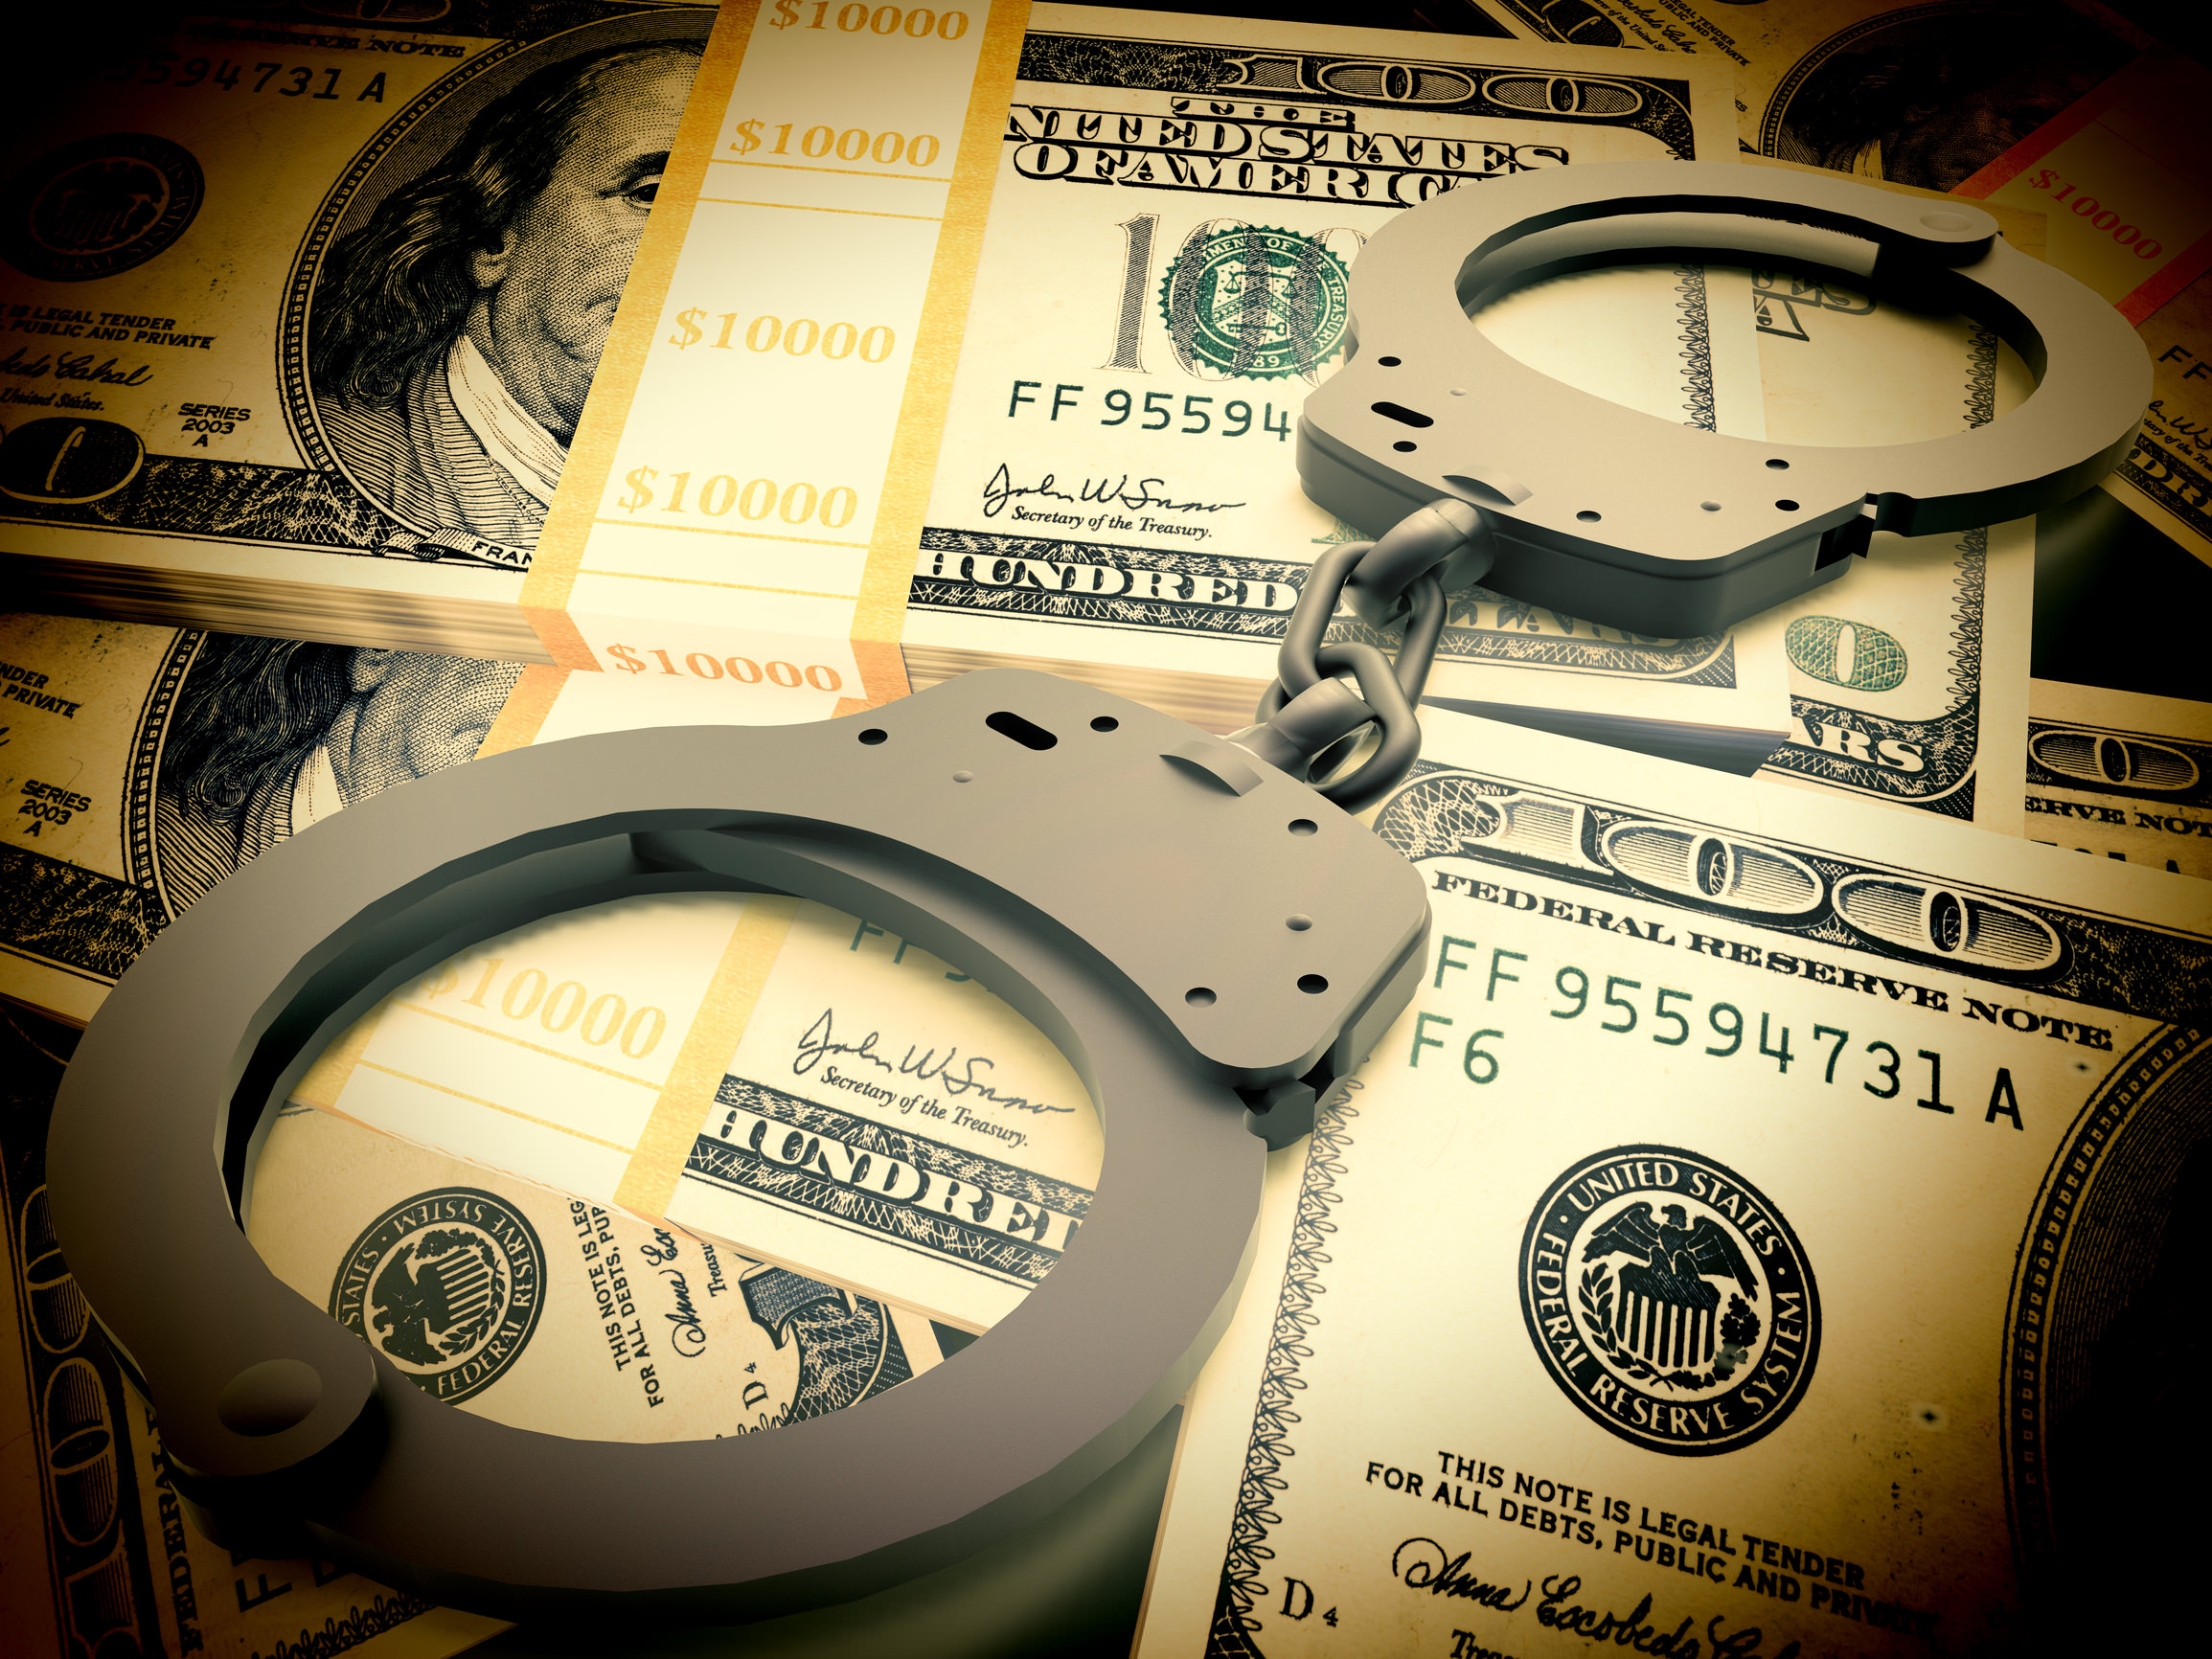 Two Defendants Sentenced for Wire Fraud and Money Laundering Conspiracy